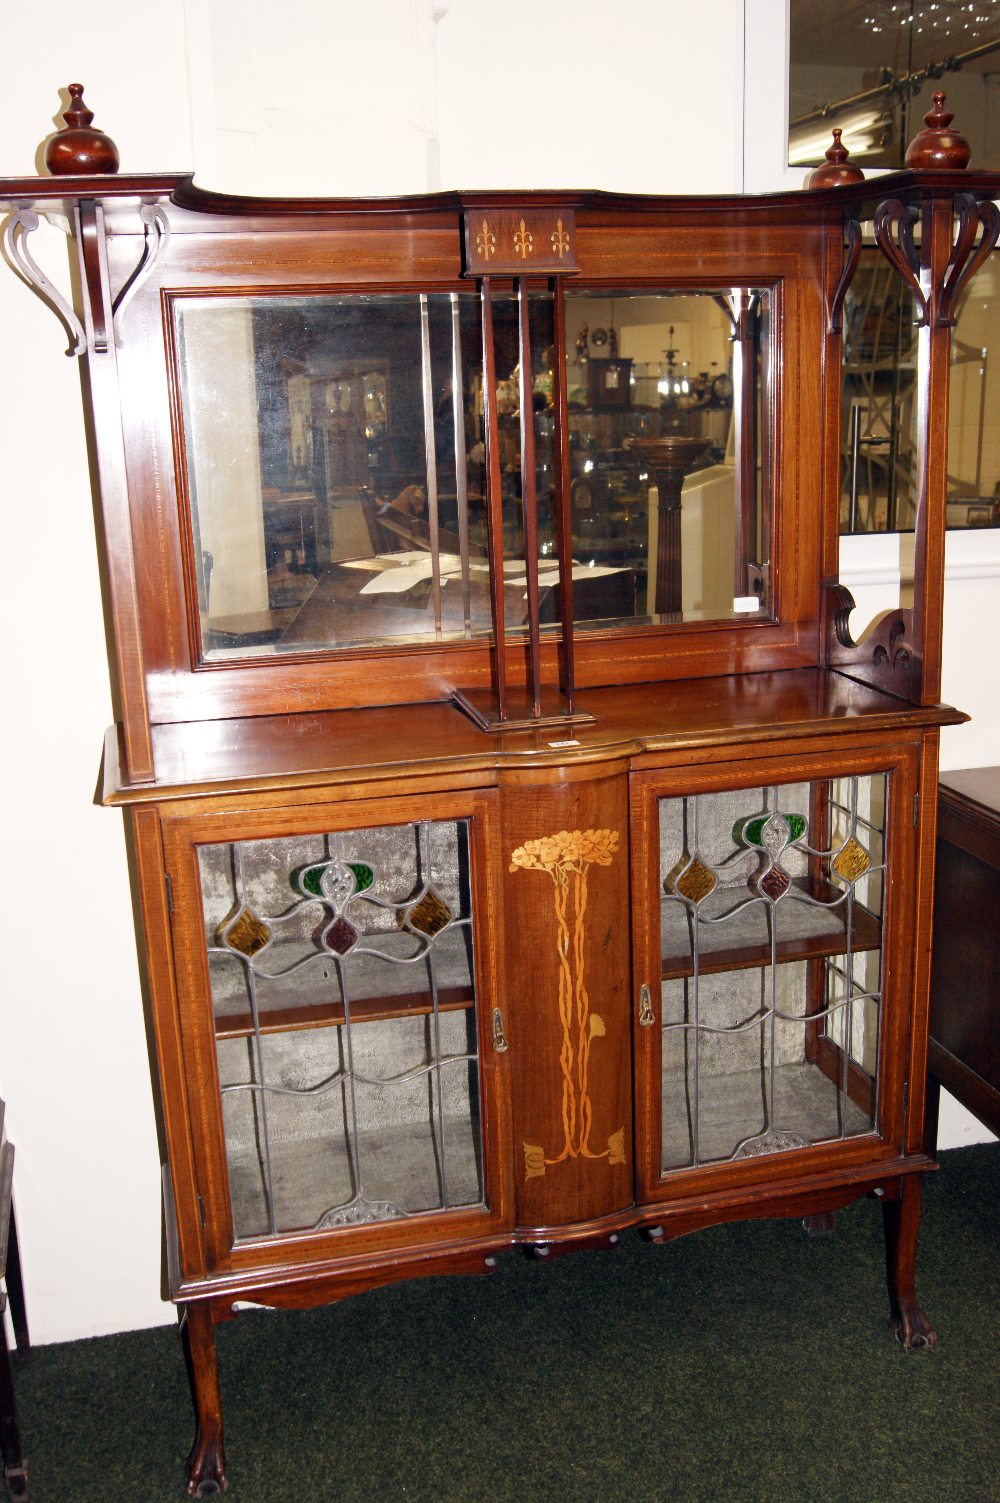 Mahogany Art Nouveau cabinet with naturalistic floral design - two leaded glazed doors with coloured